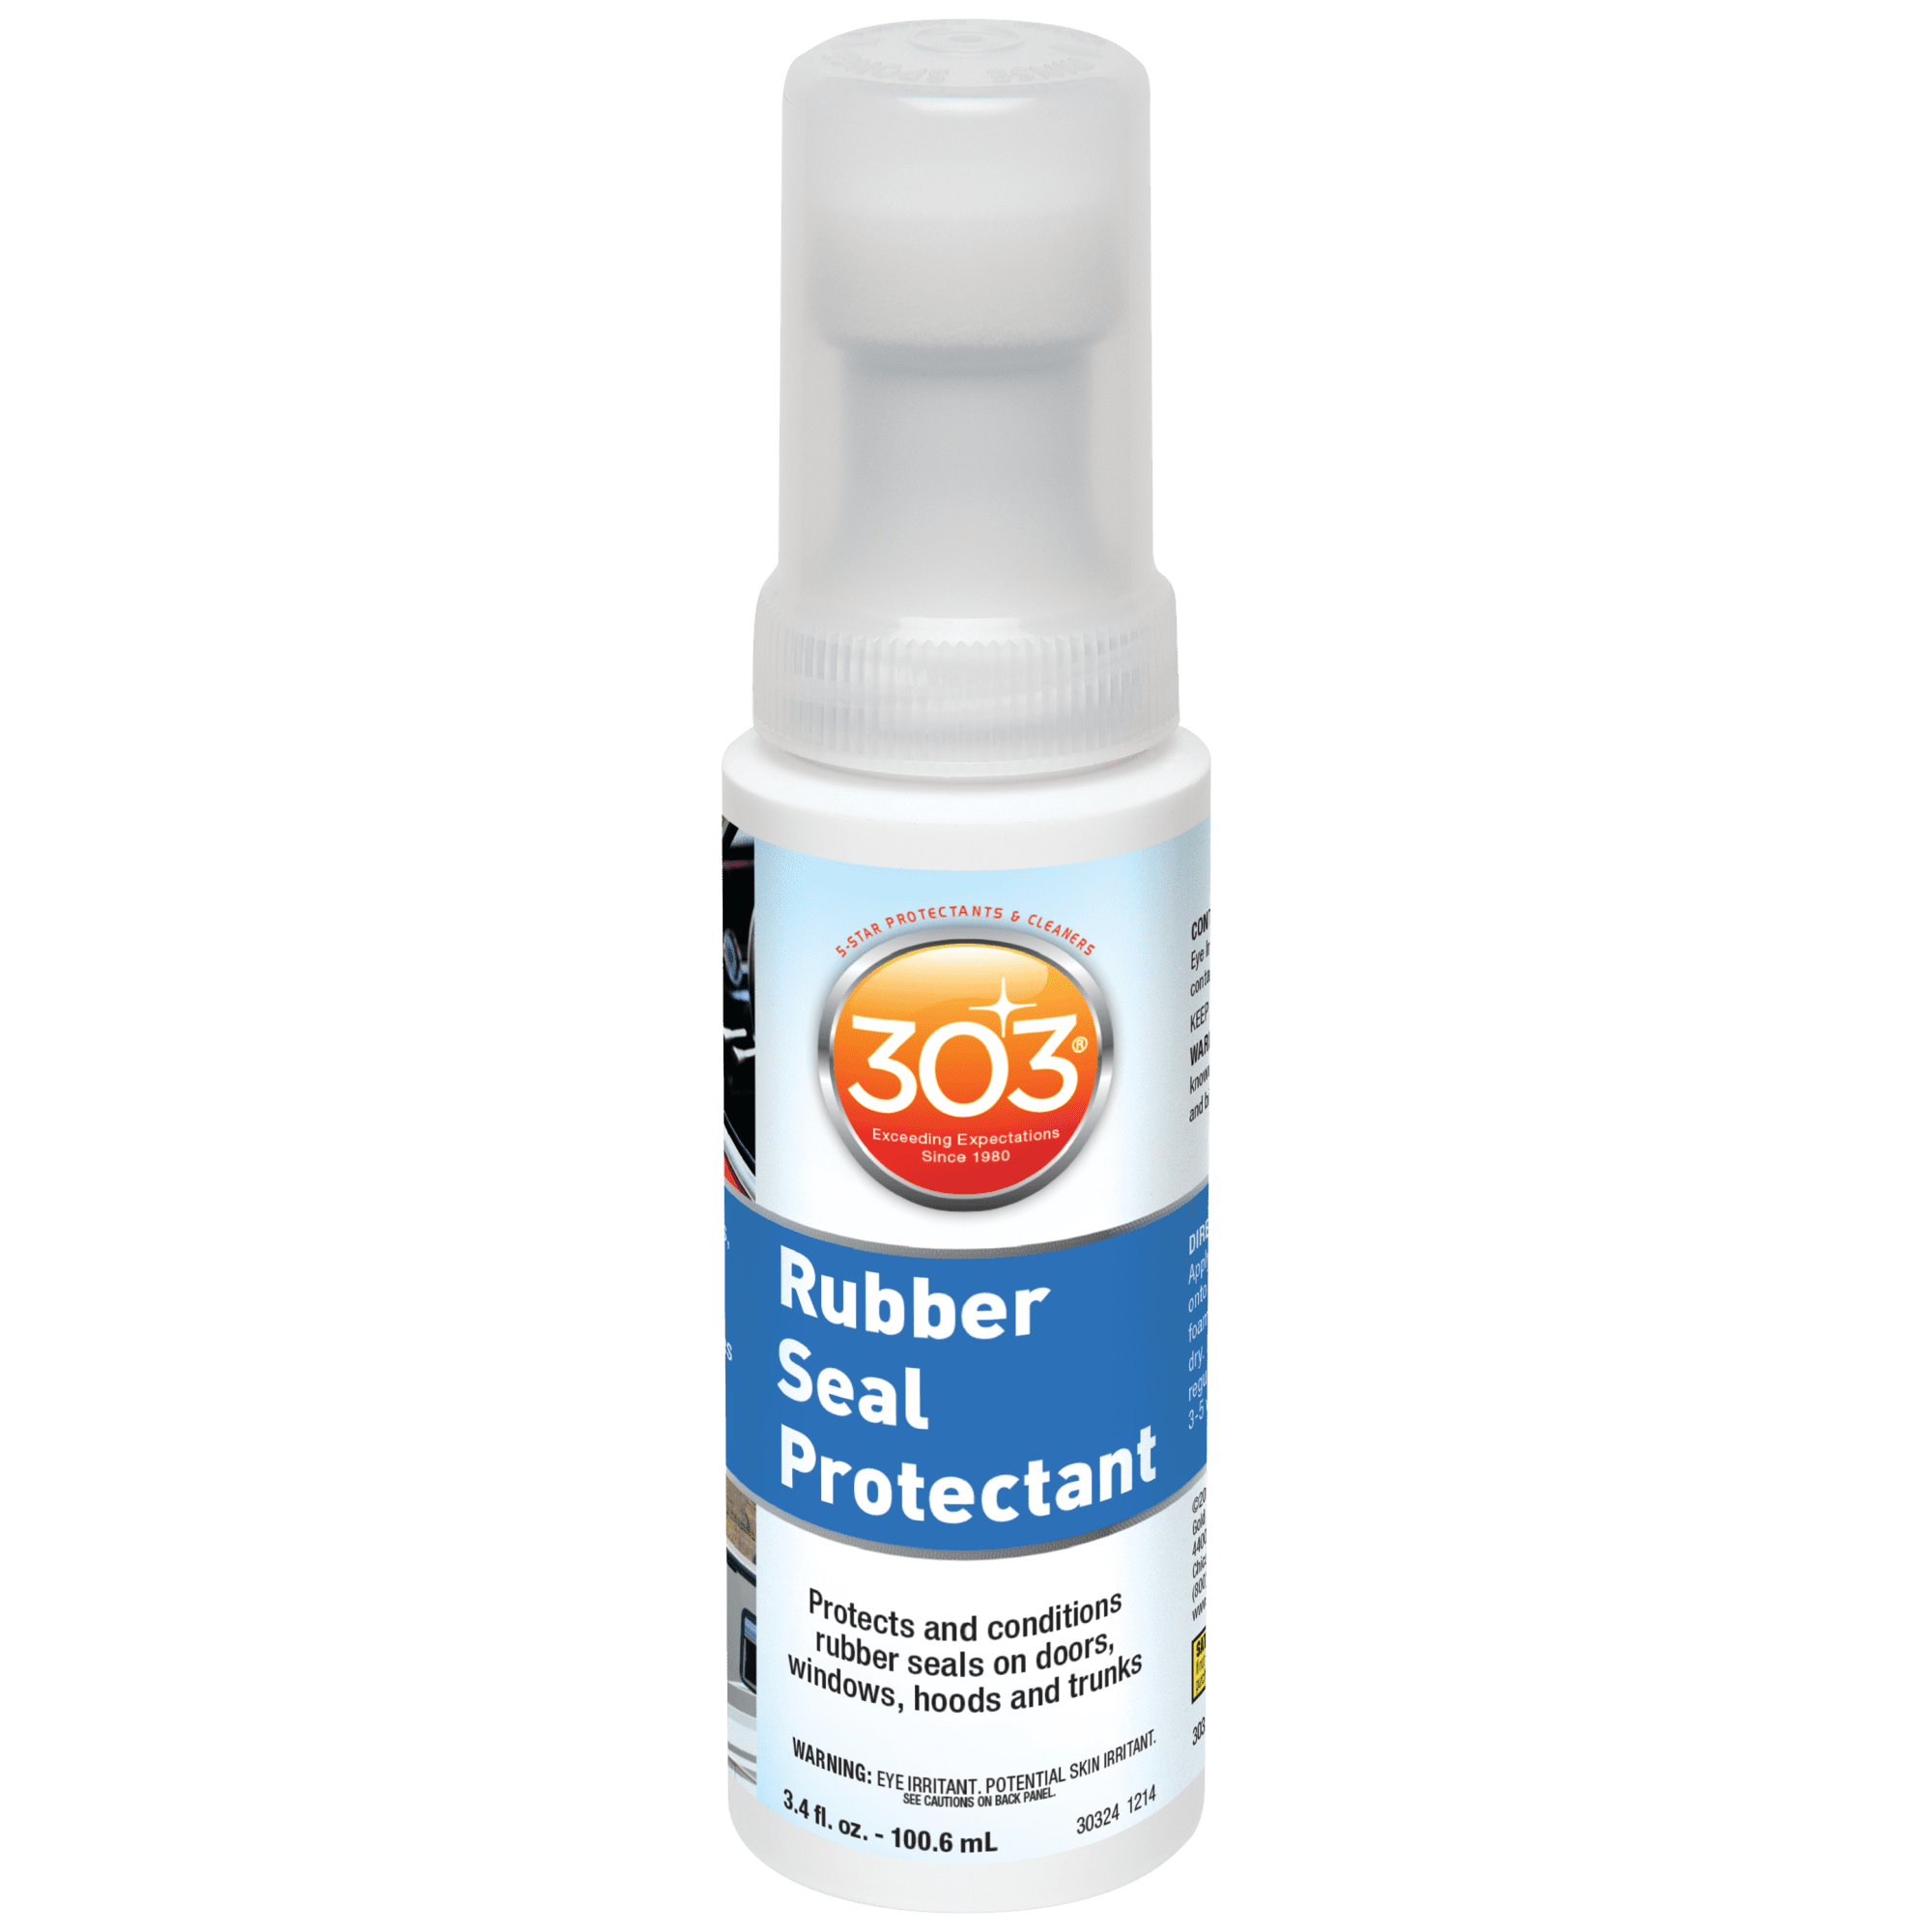 Graden Celsius Neerwaarts Onvervangbaar 303 Rubber Seal Protectant - Protects And Conditions Rubber Seals On Doors,  Windows, Hoods, And Trunks - Rejuvenates Color On Old Seals, 3.4 fl. oz.  (30324) - Walmart.com